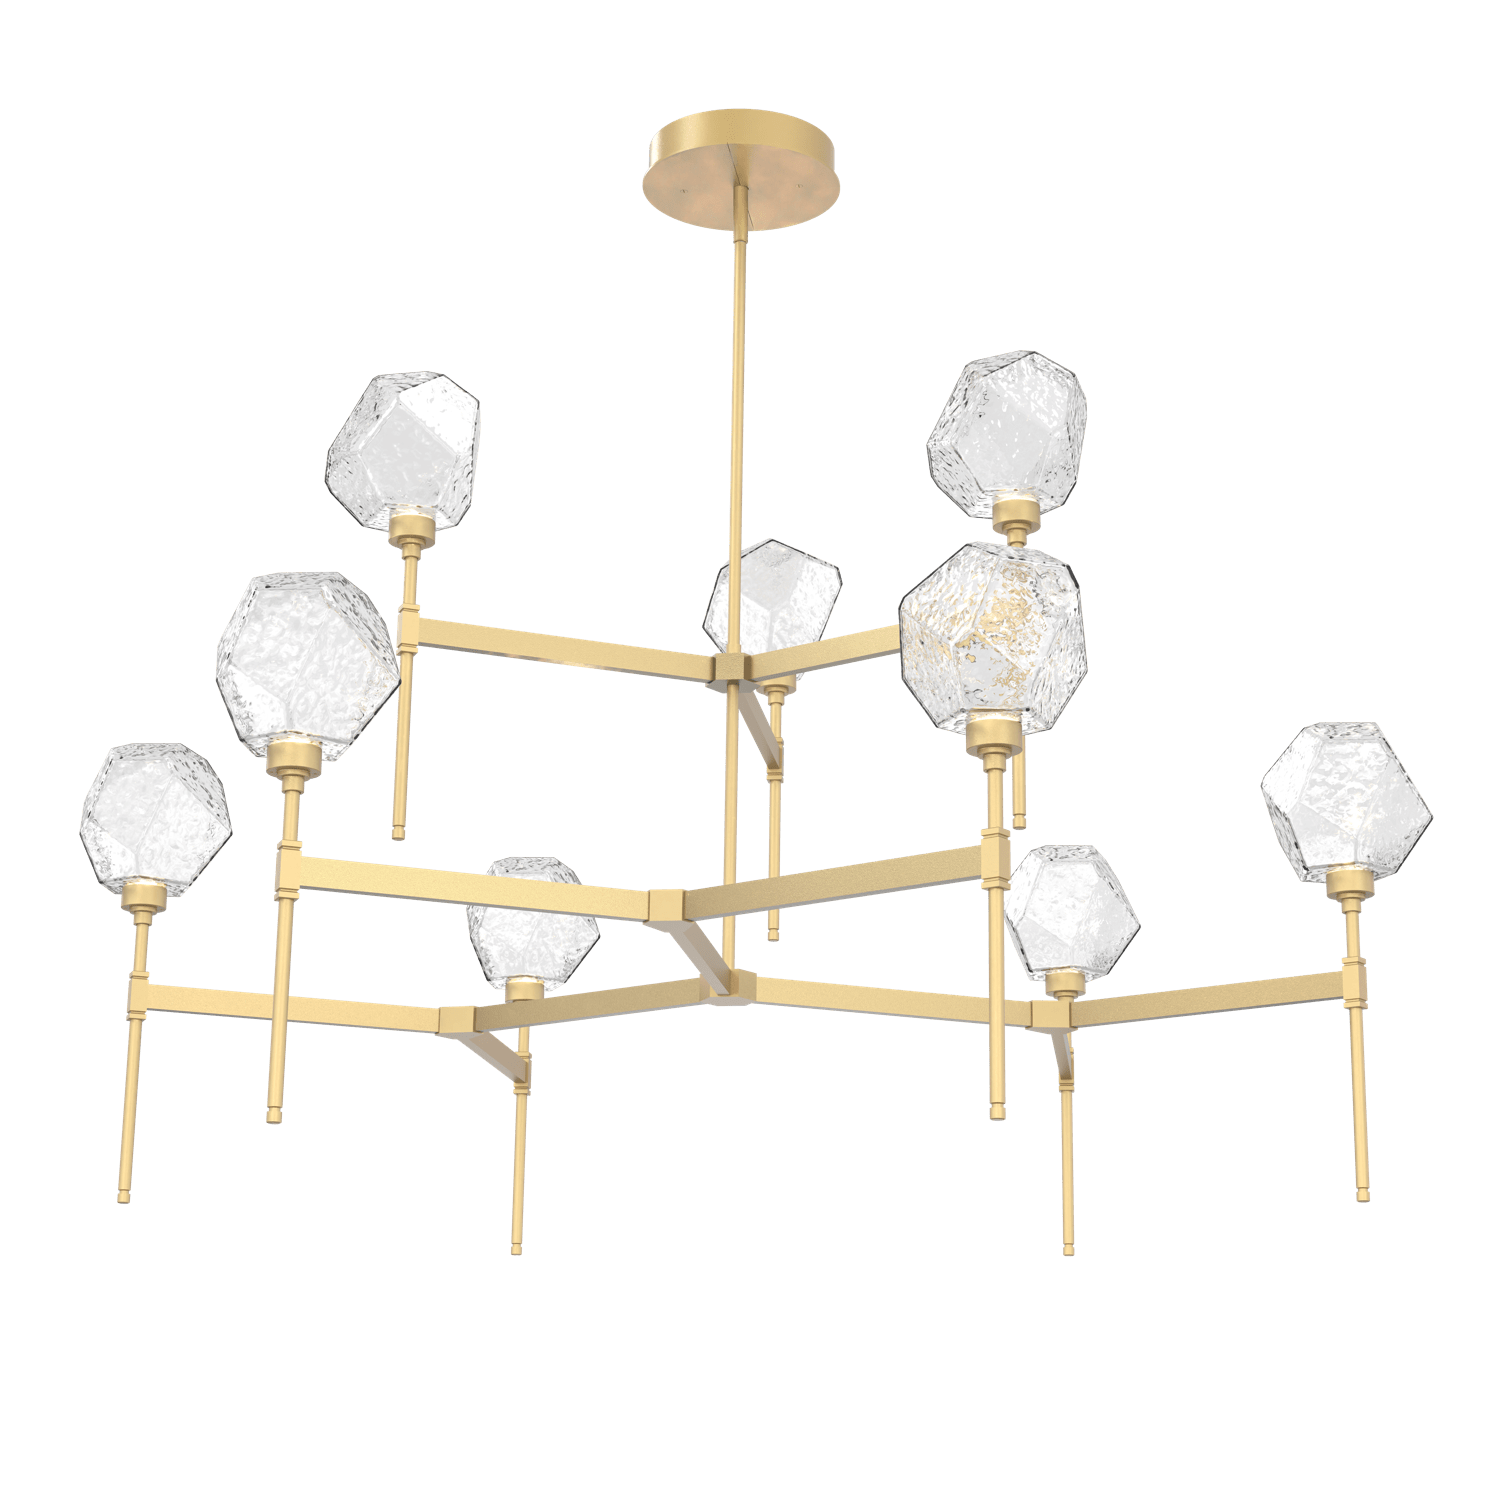 CHB0039-55-GB-C-Hammerton-Studio-Gem-round-two-tier-belvedere-chandelier-with-gilded-brass-finish-and-clear-blown-glass-shades-and-LED-lamping